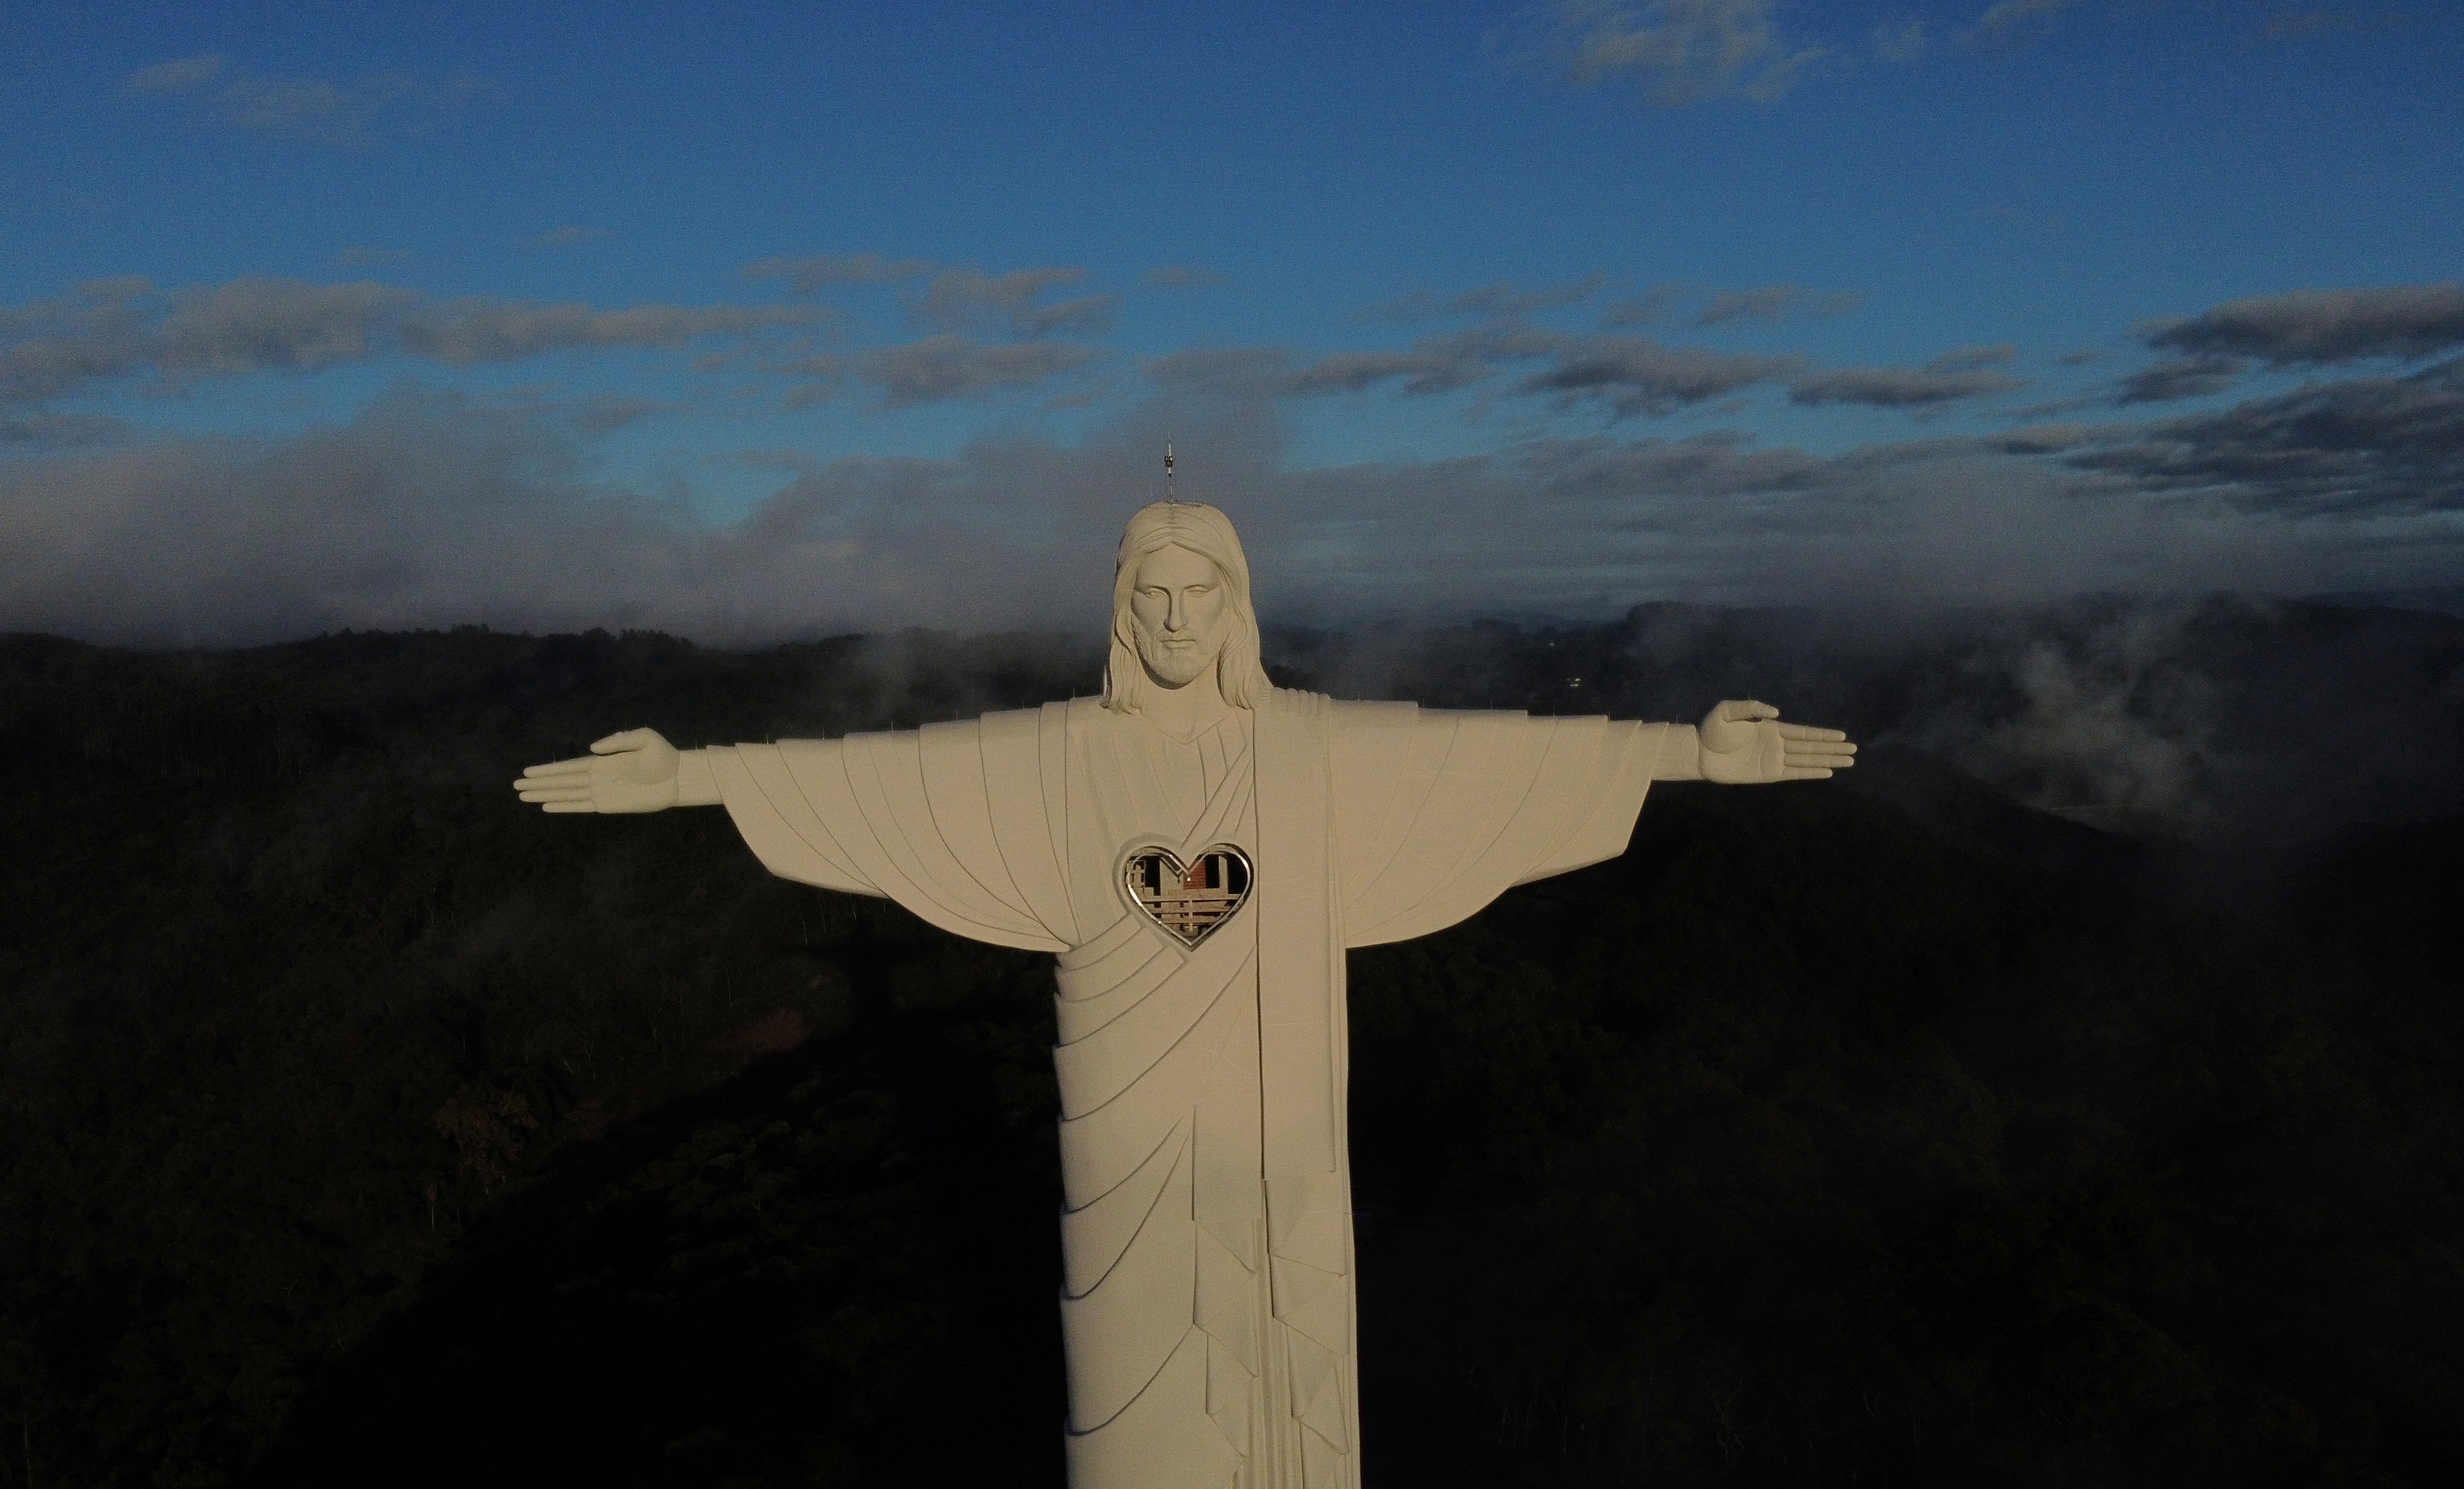 Brazil has a towering new statue of Jesus | CNN Travel